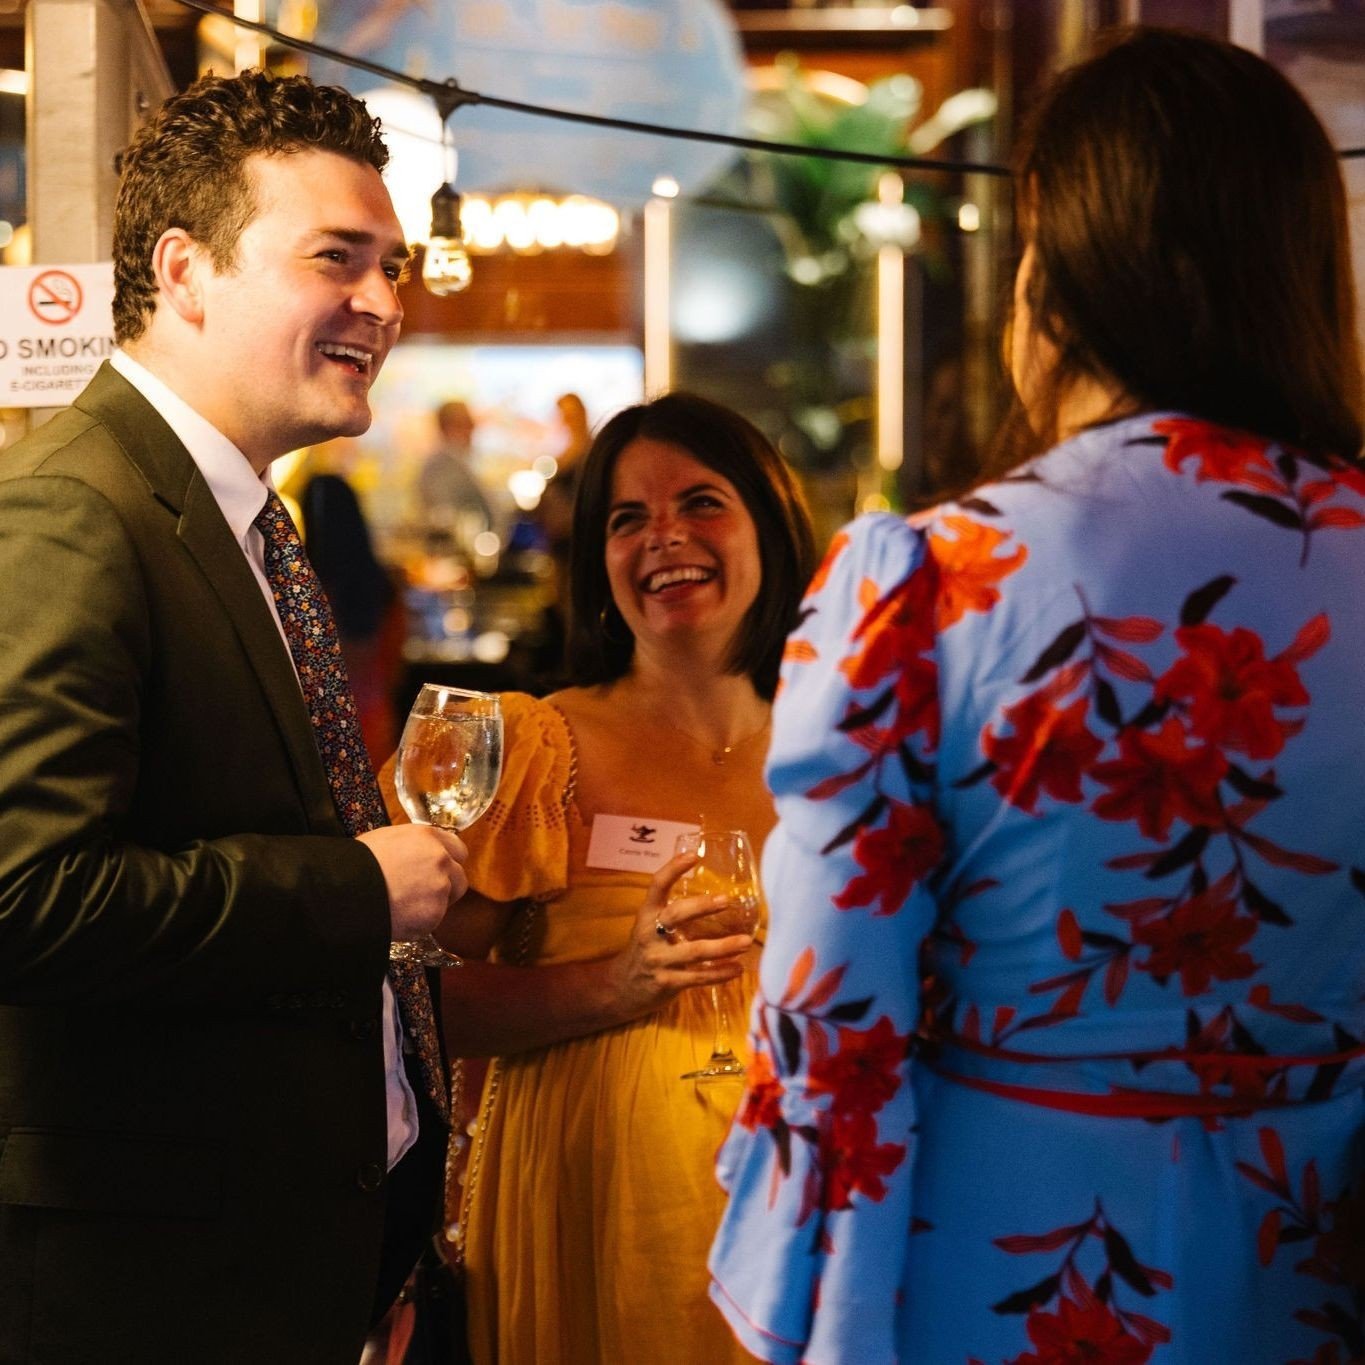 It was an enchanting May evening as our community came together for Browning's Spring Celebration! The occasion was filled with joy, camaraderie, and cherished moments thanks to all our families, faculty, and friends who graced us with their presence